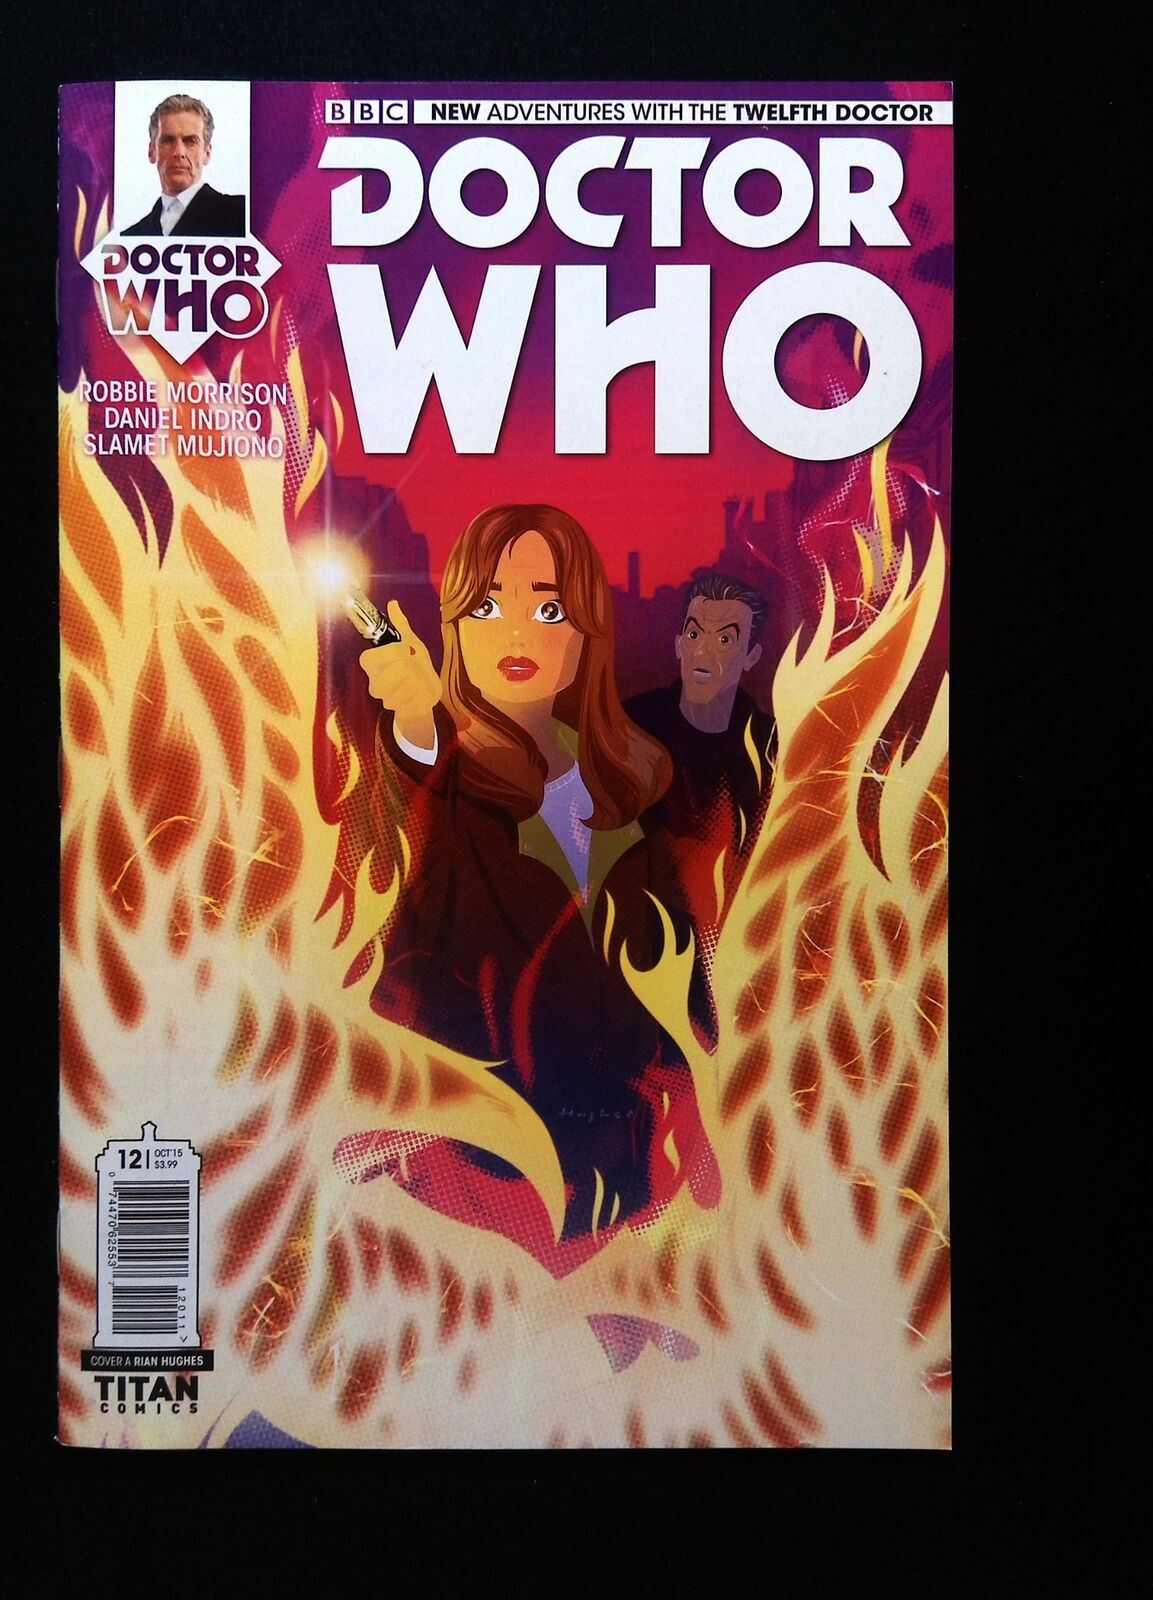 Doctor Who The Twelfth Doctor #12  Titan  Comics 2015 Vf/Nm